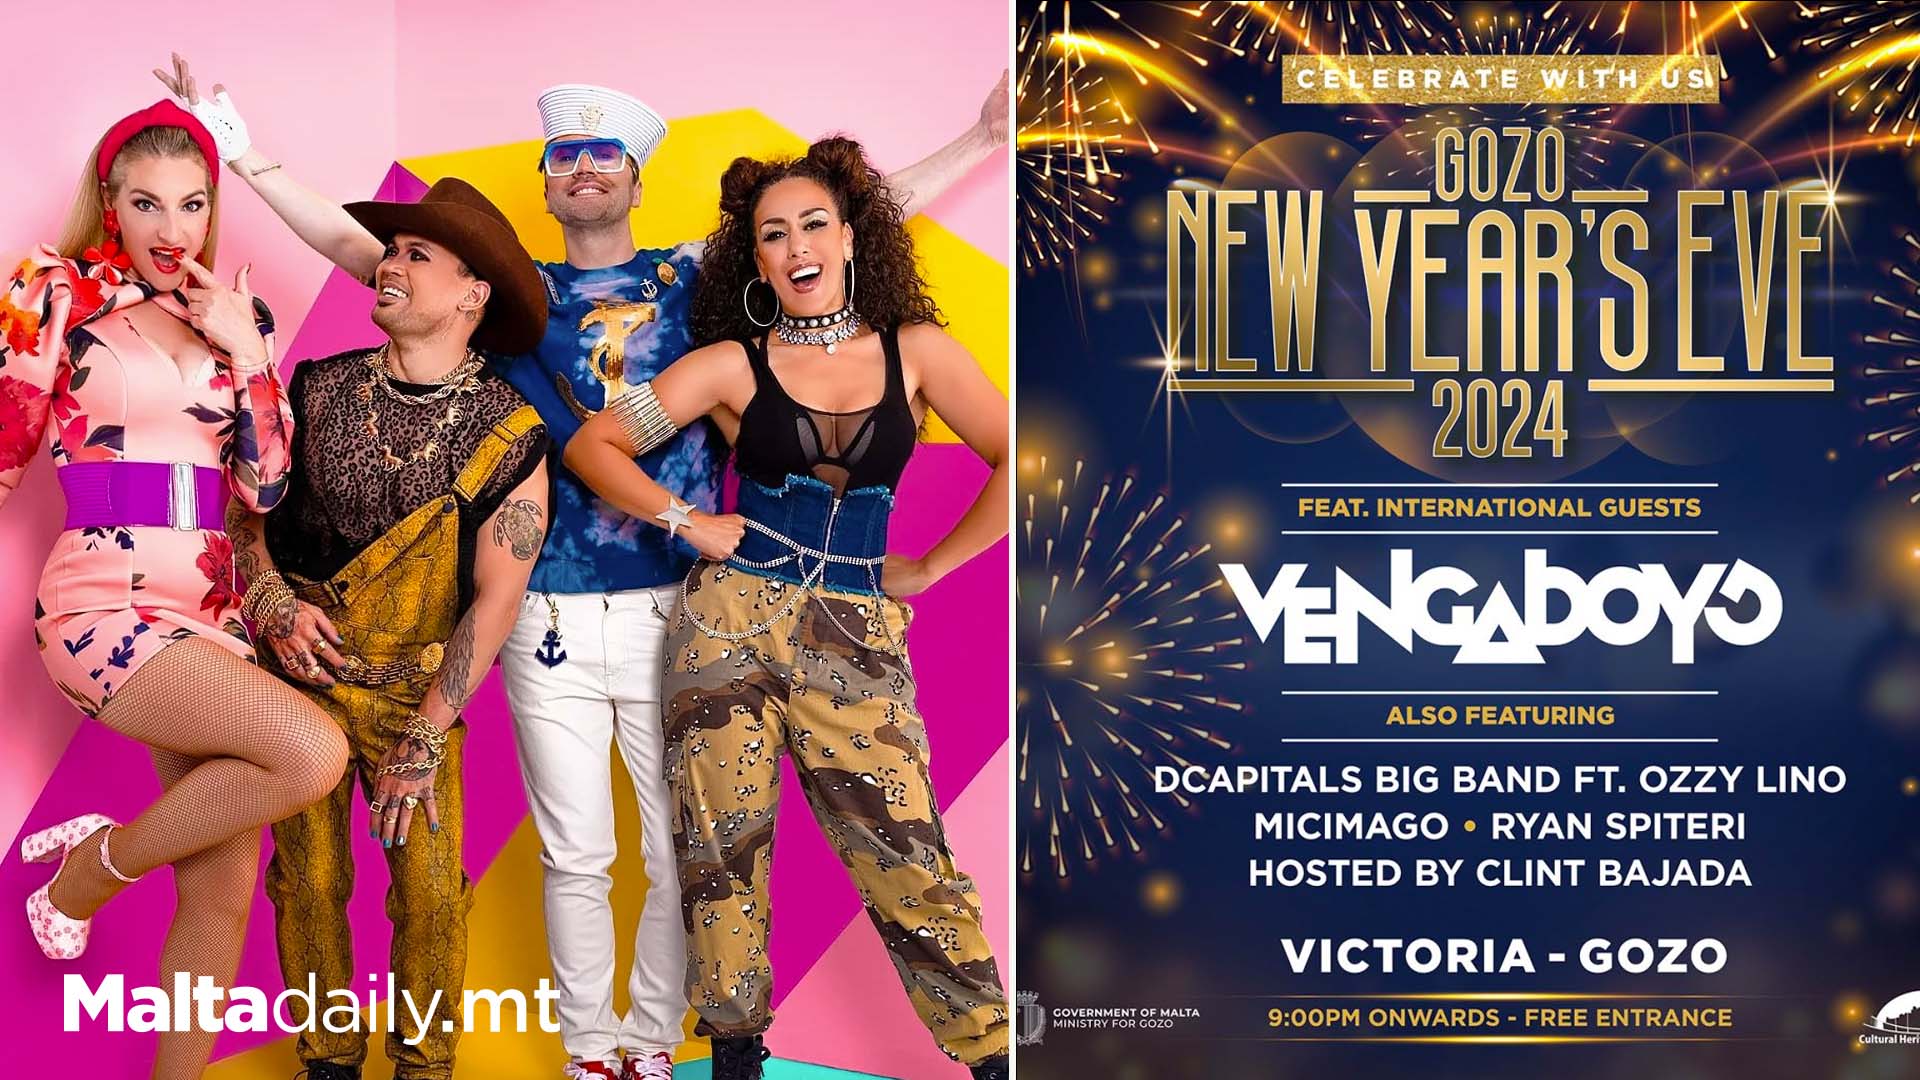 Iconic Vengaboys Are Coming To Gozo For New Year's Eve